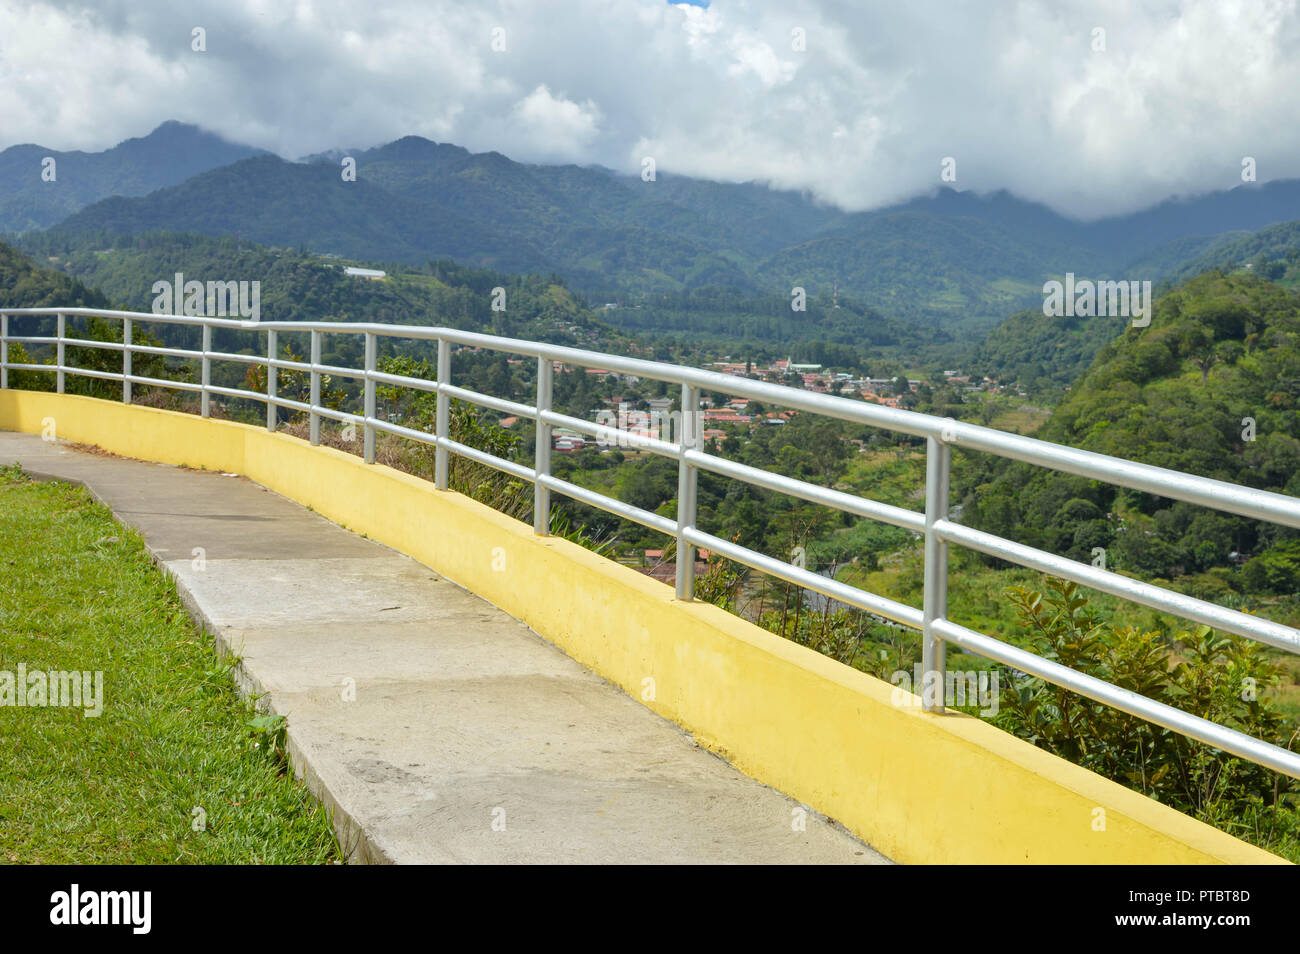 Observation deck with the landscapes of the highlands of Boquete and Caldera River, Chiriqui region of Panama Stock Photo